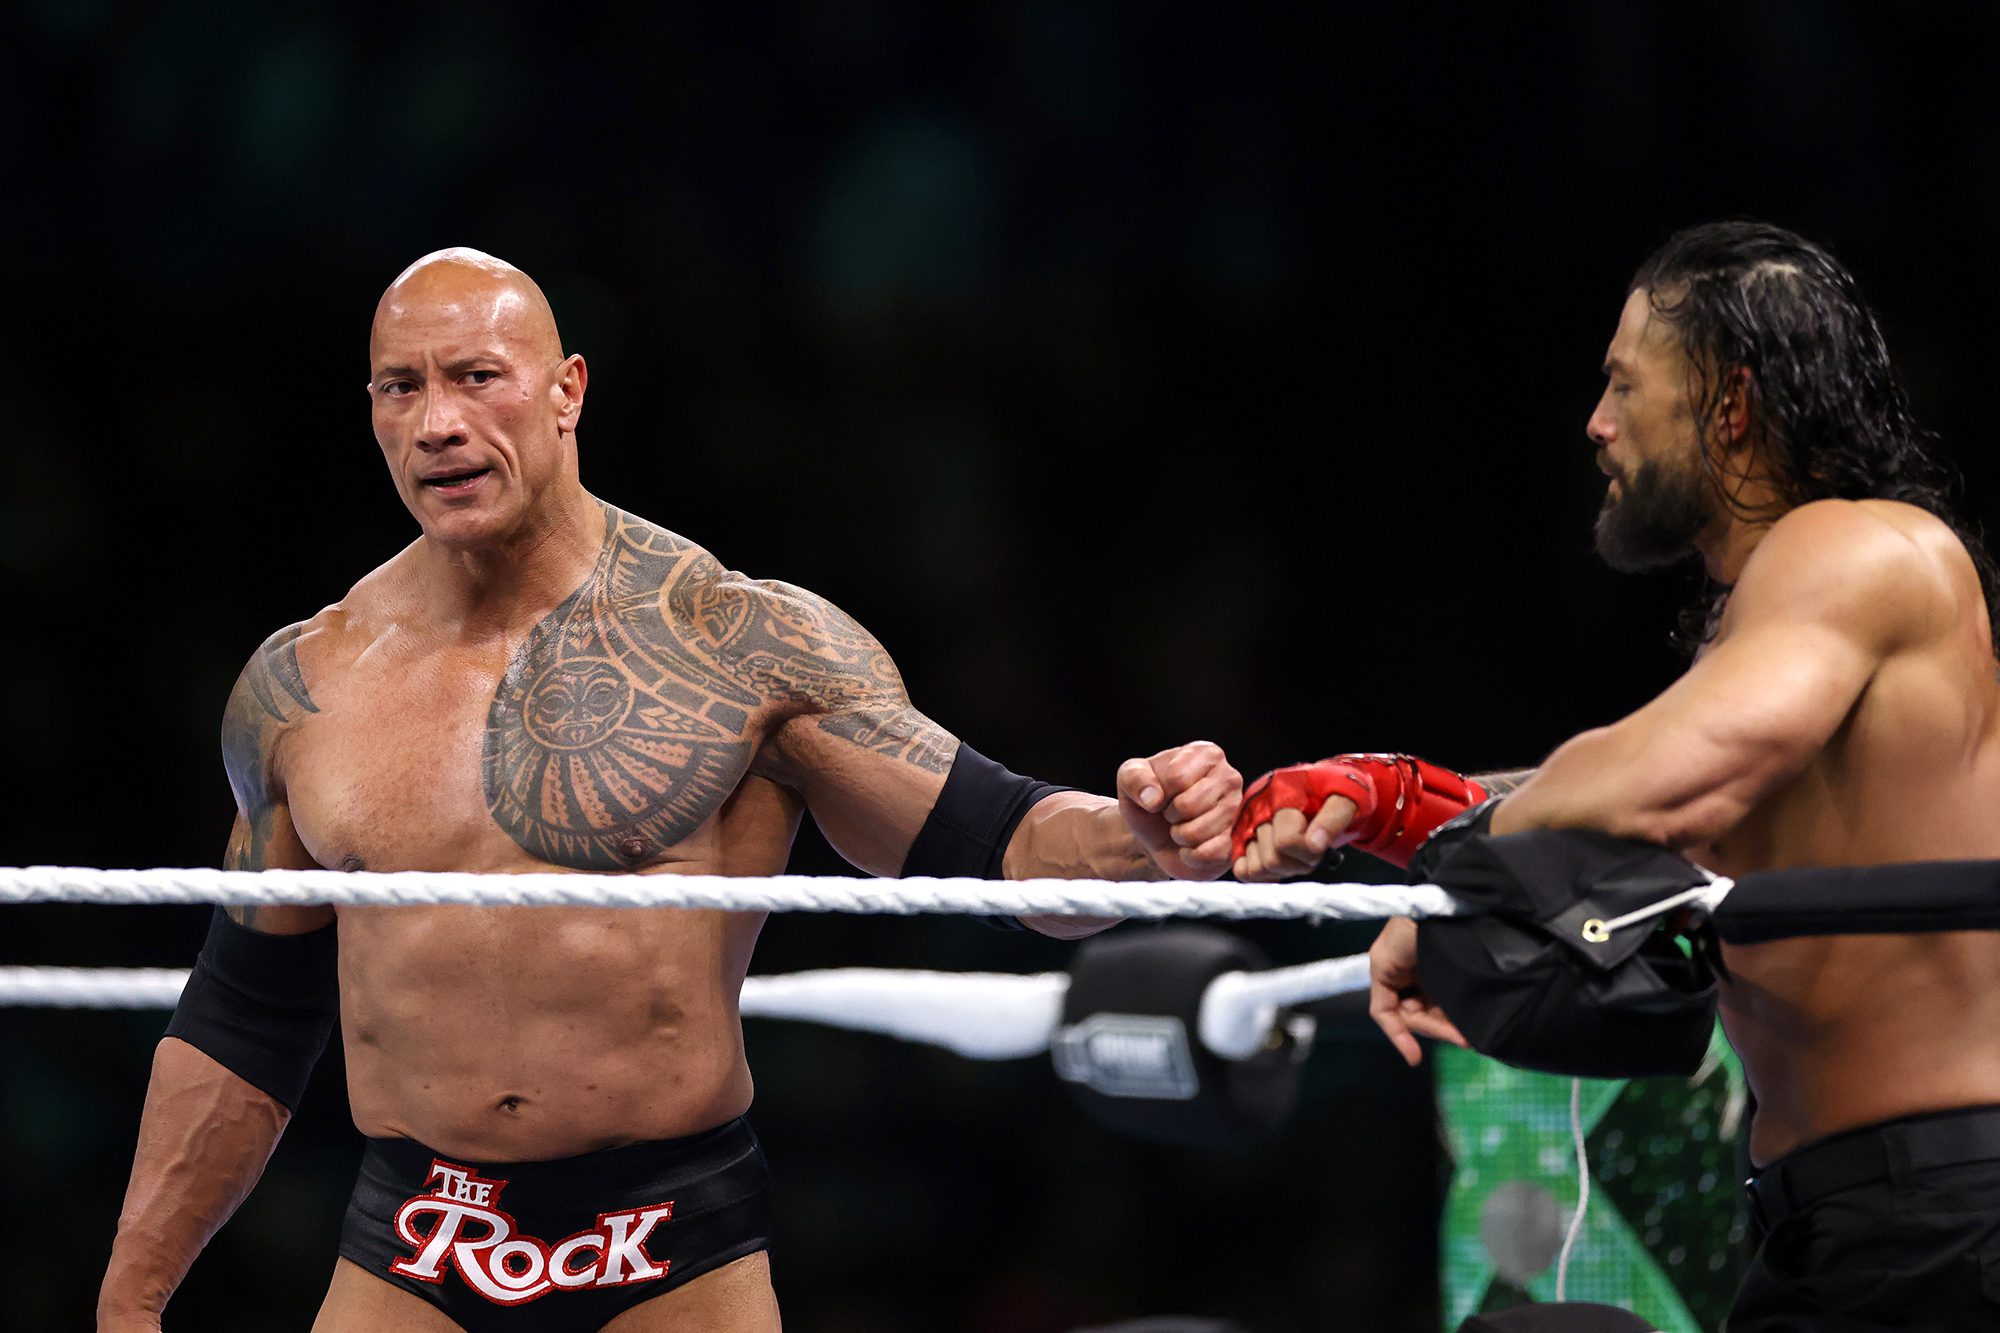 The Rock Returns to Wrestlemania in Philly, Meets Jason Kelce